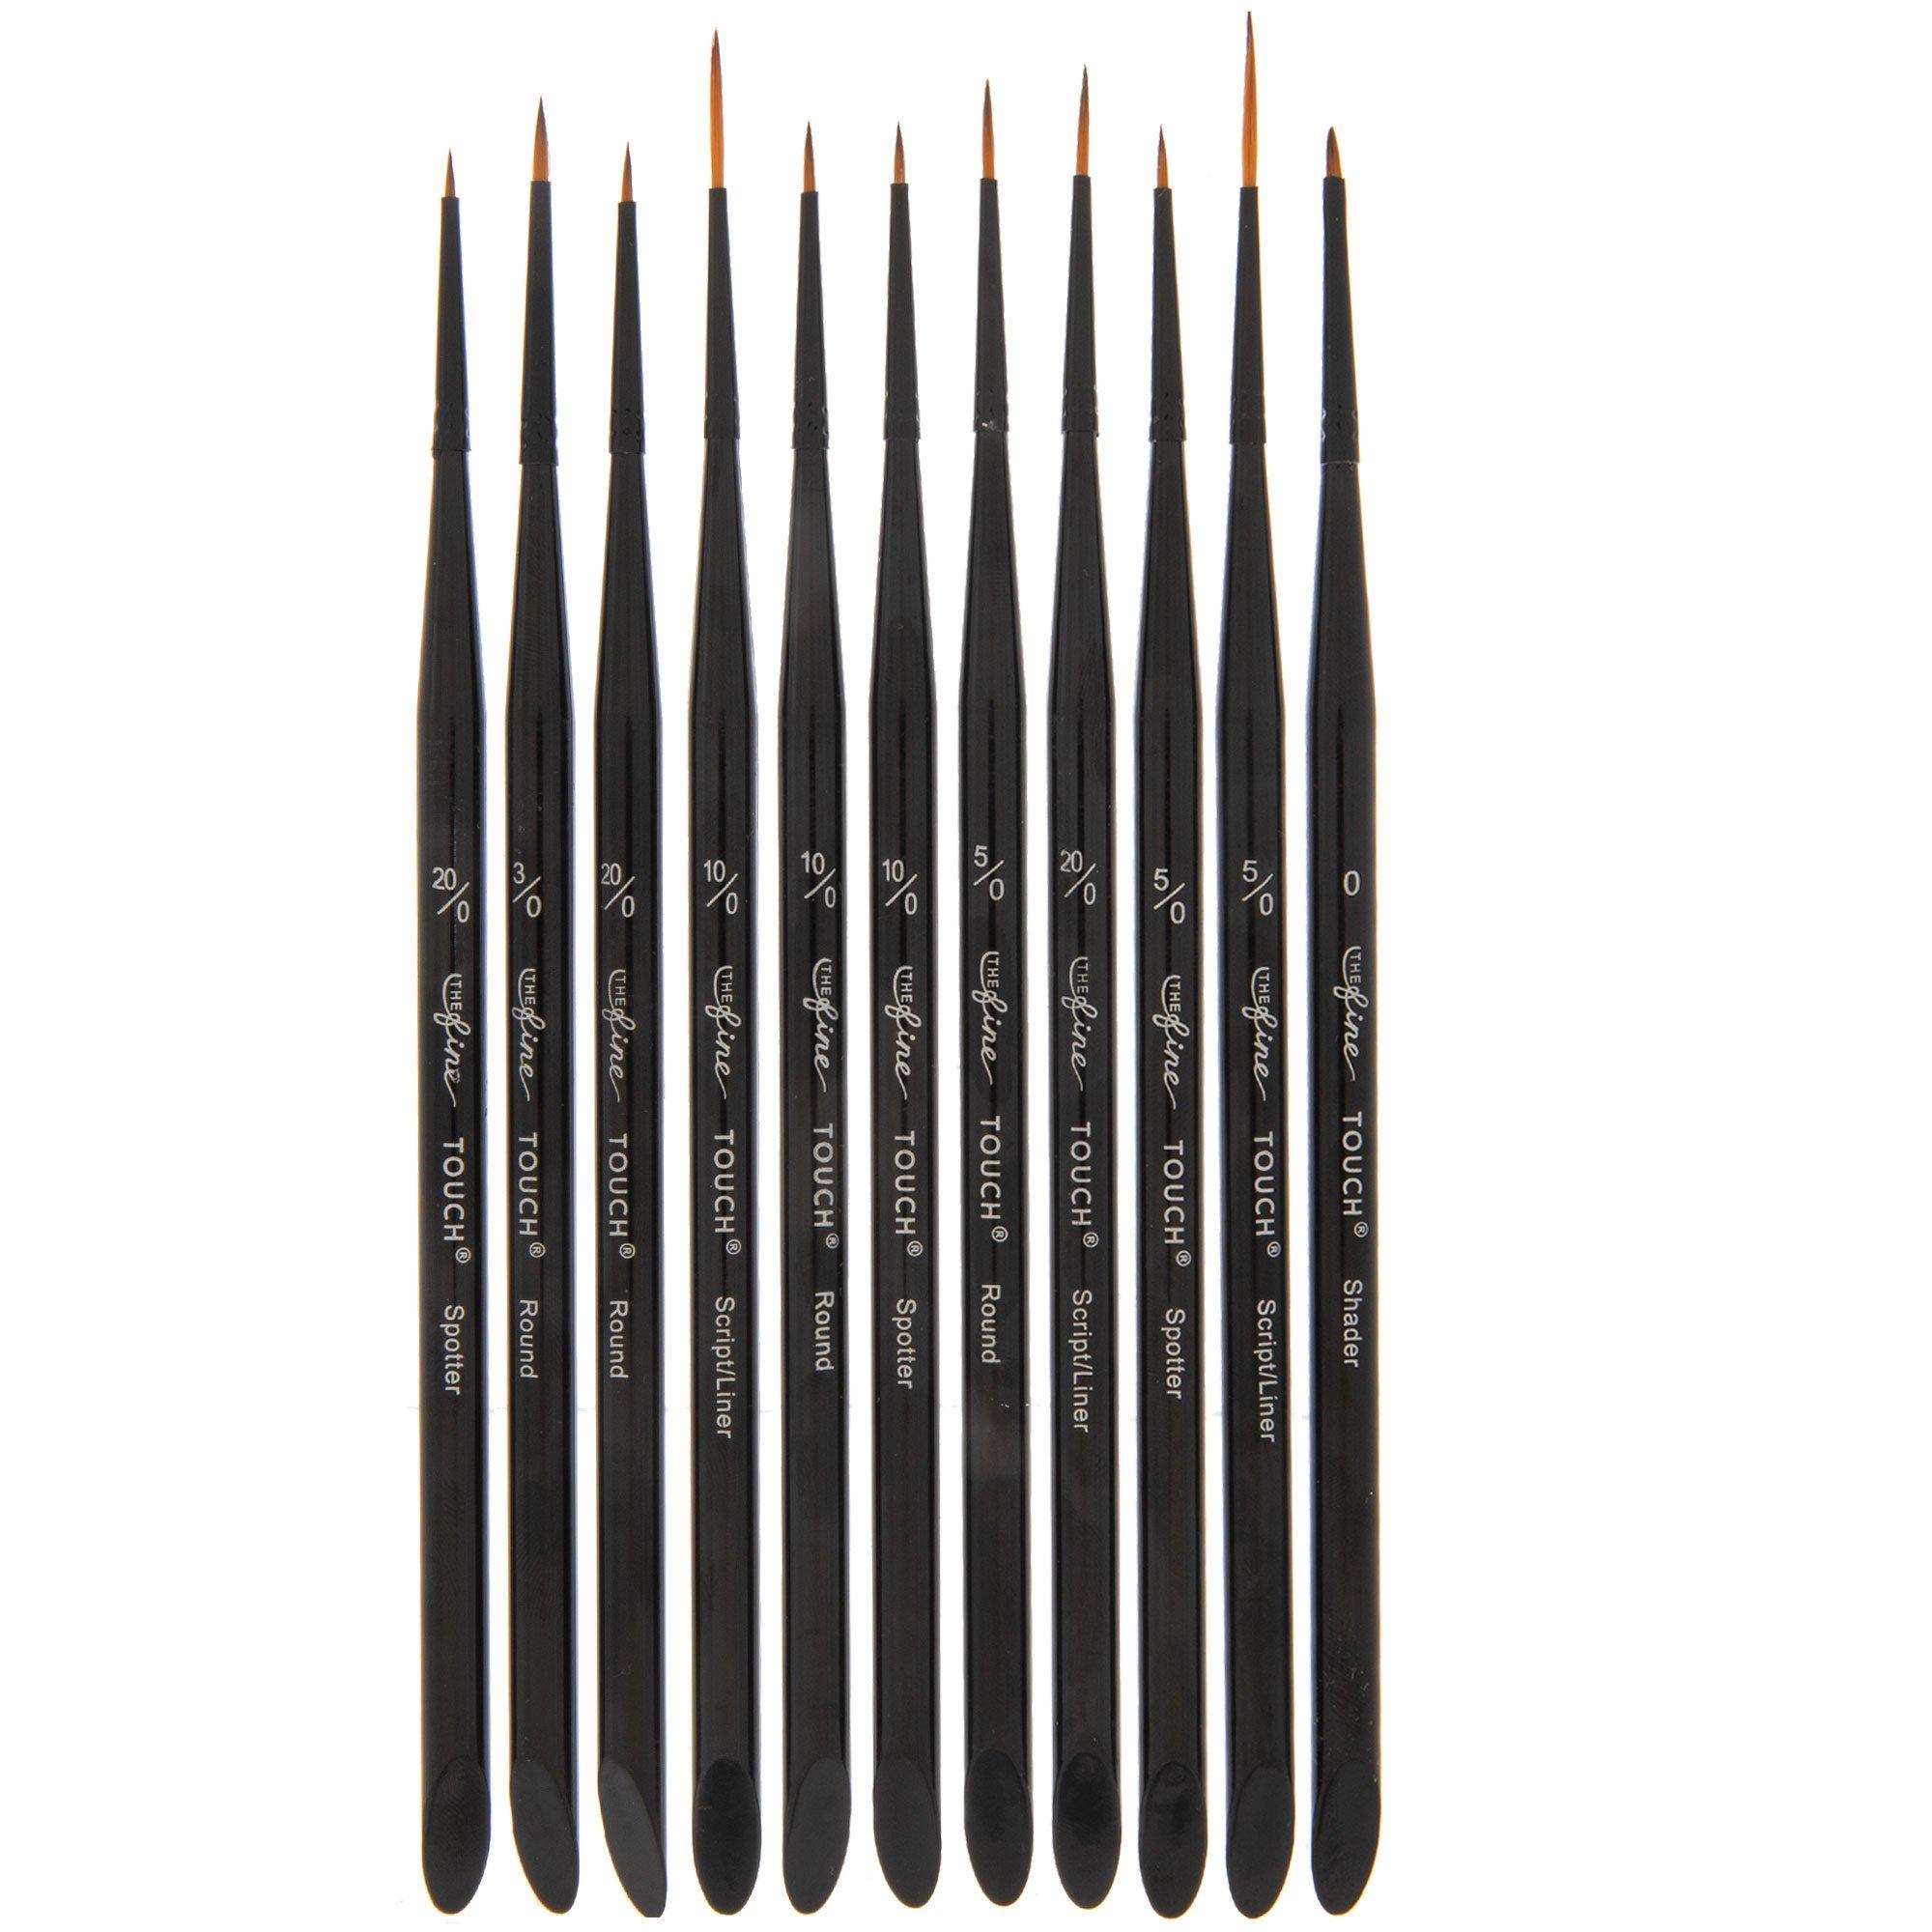 Artist Paint Brushes - Set of 5 Assorted Synthetic Detail Brushes